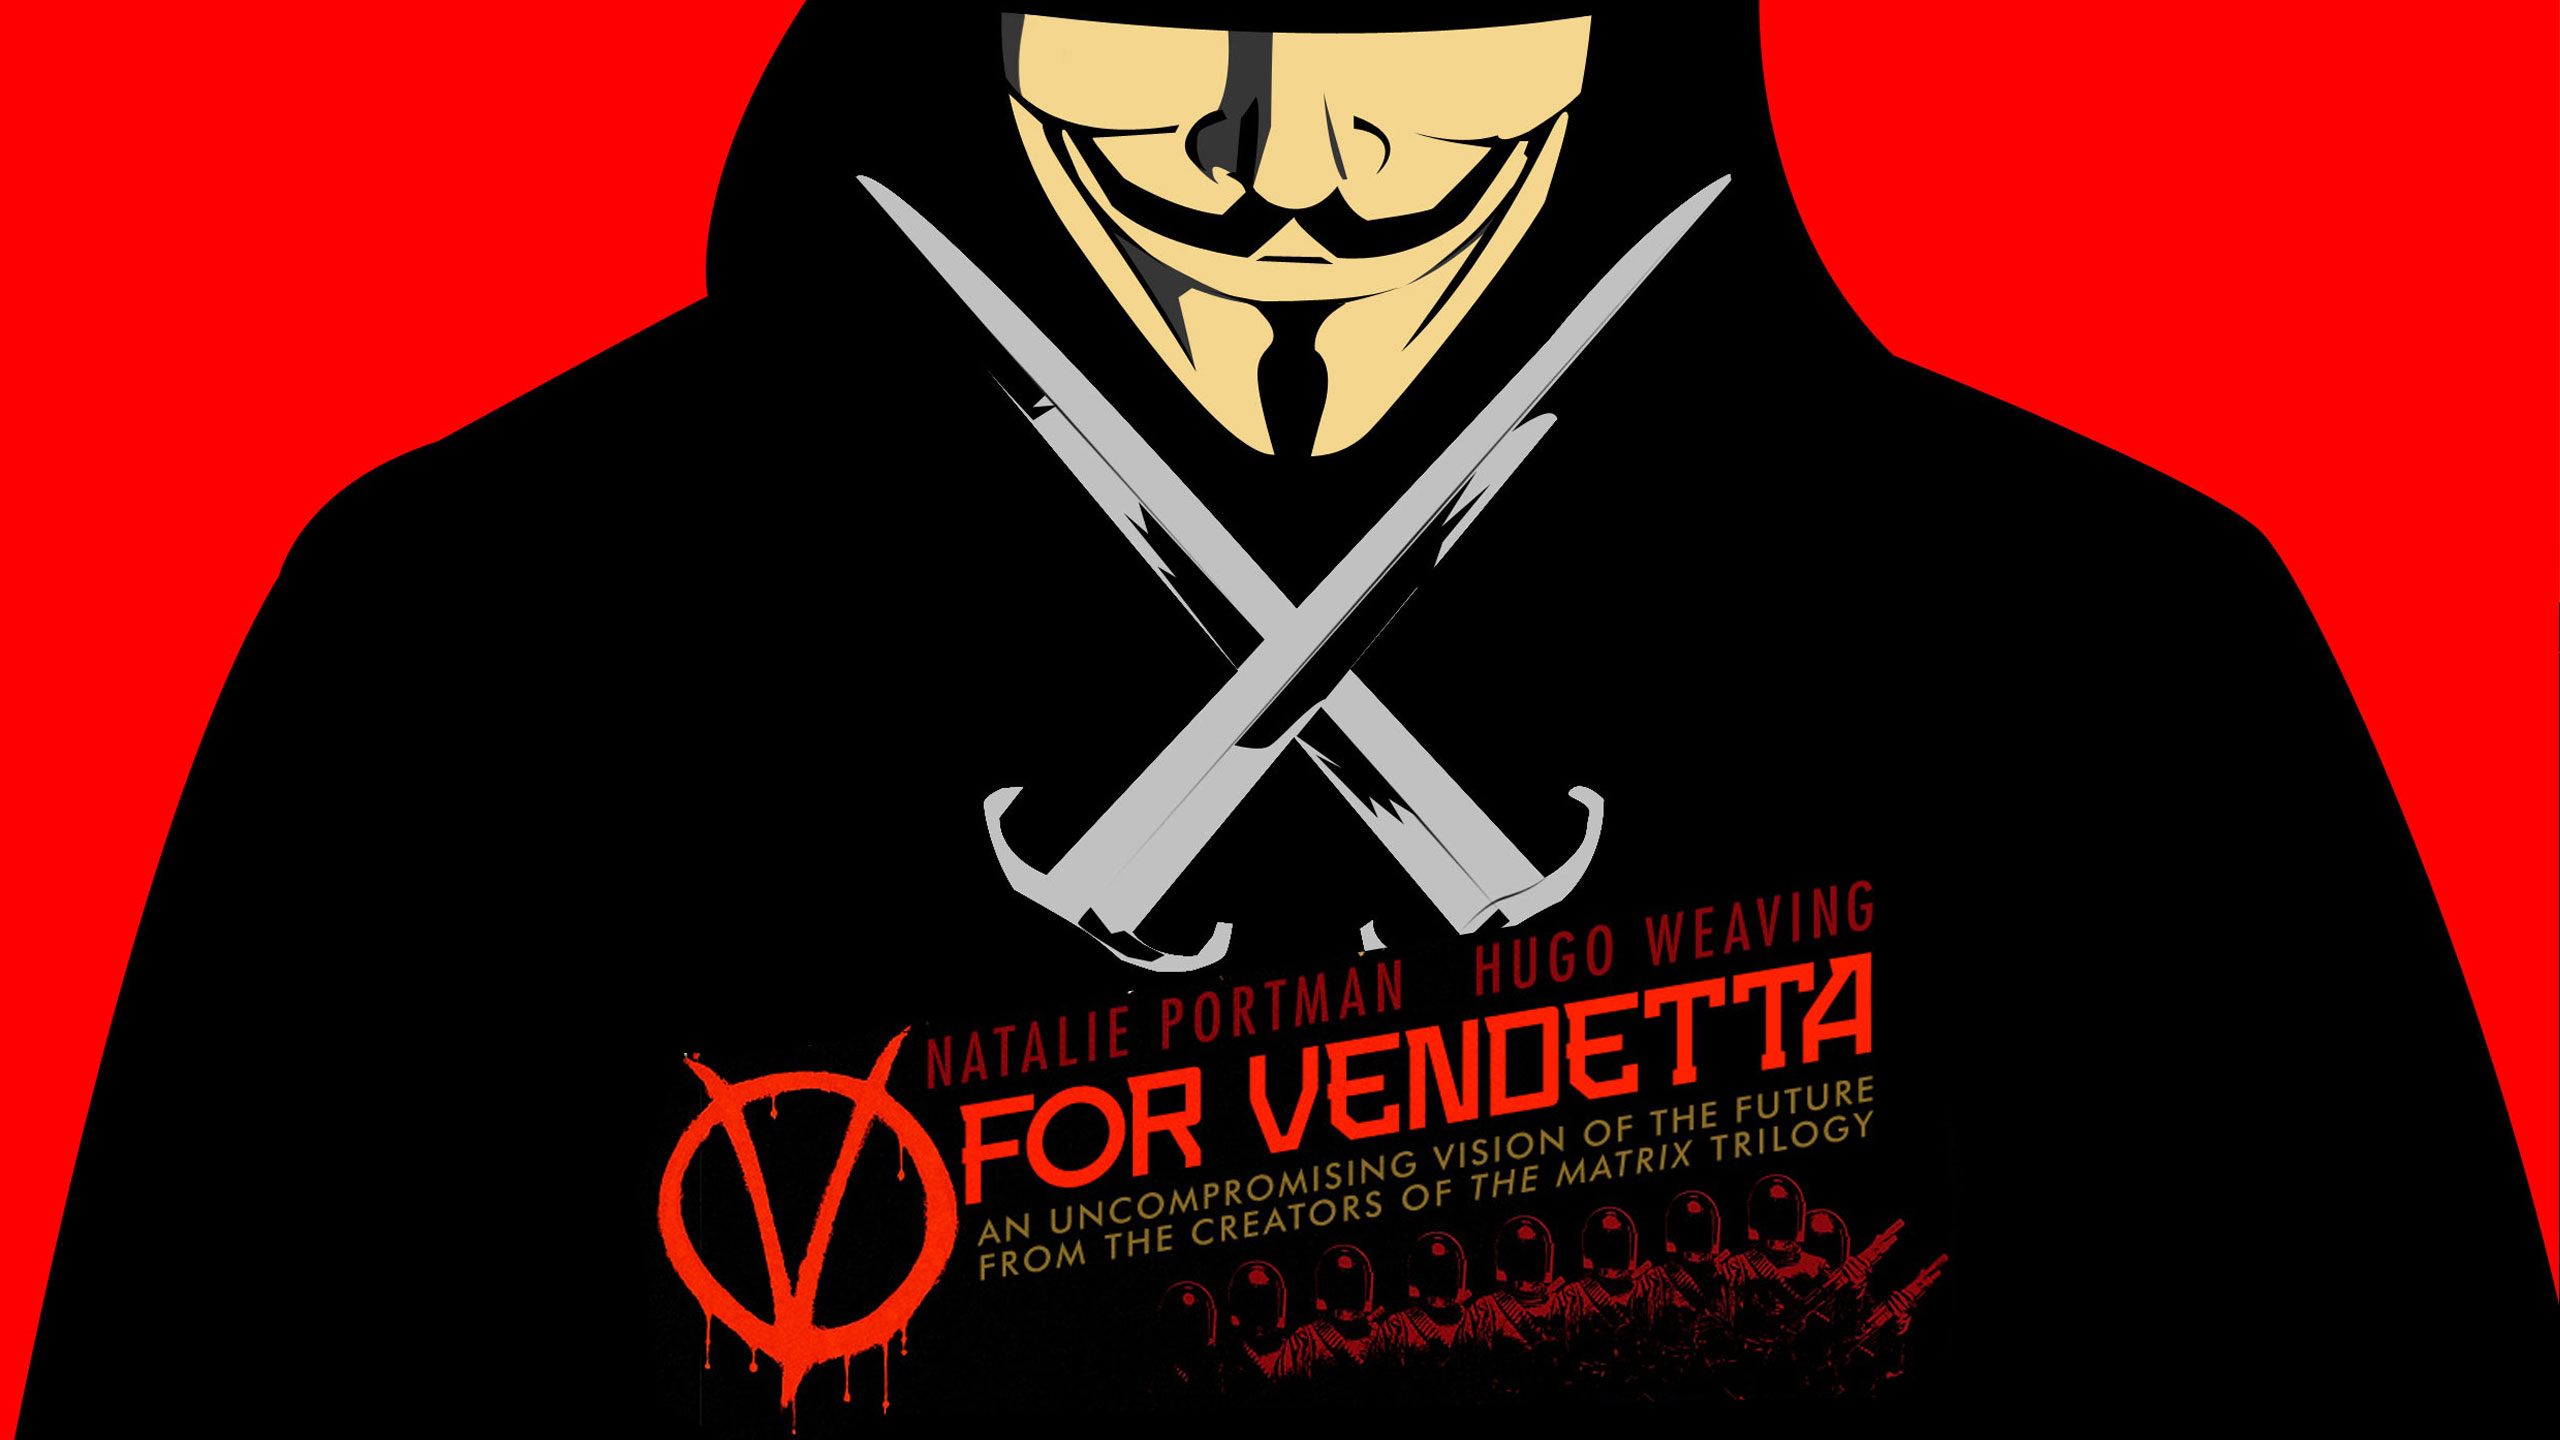 V for vendetta coming to netflix in january